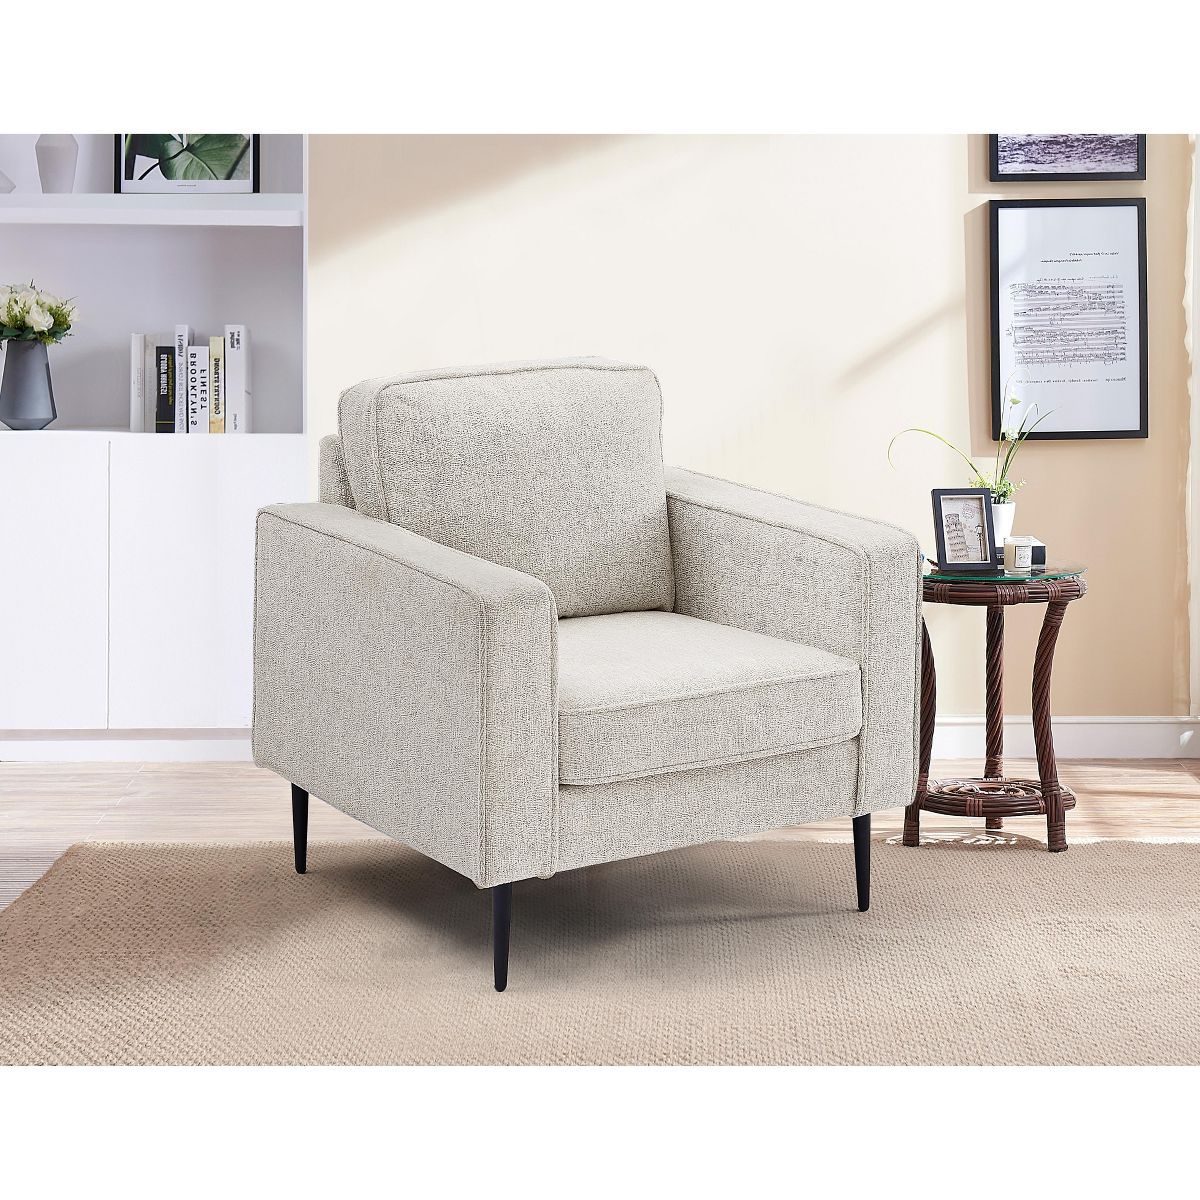 Upholstered 3 Seat/Loveseat/1 Seat/Ottoman Sofa Couches-ModernLuxe | Target